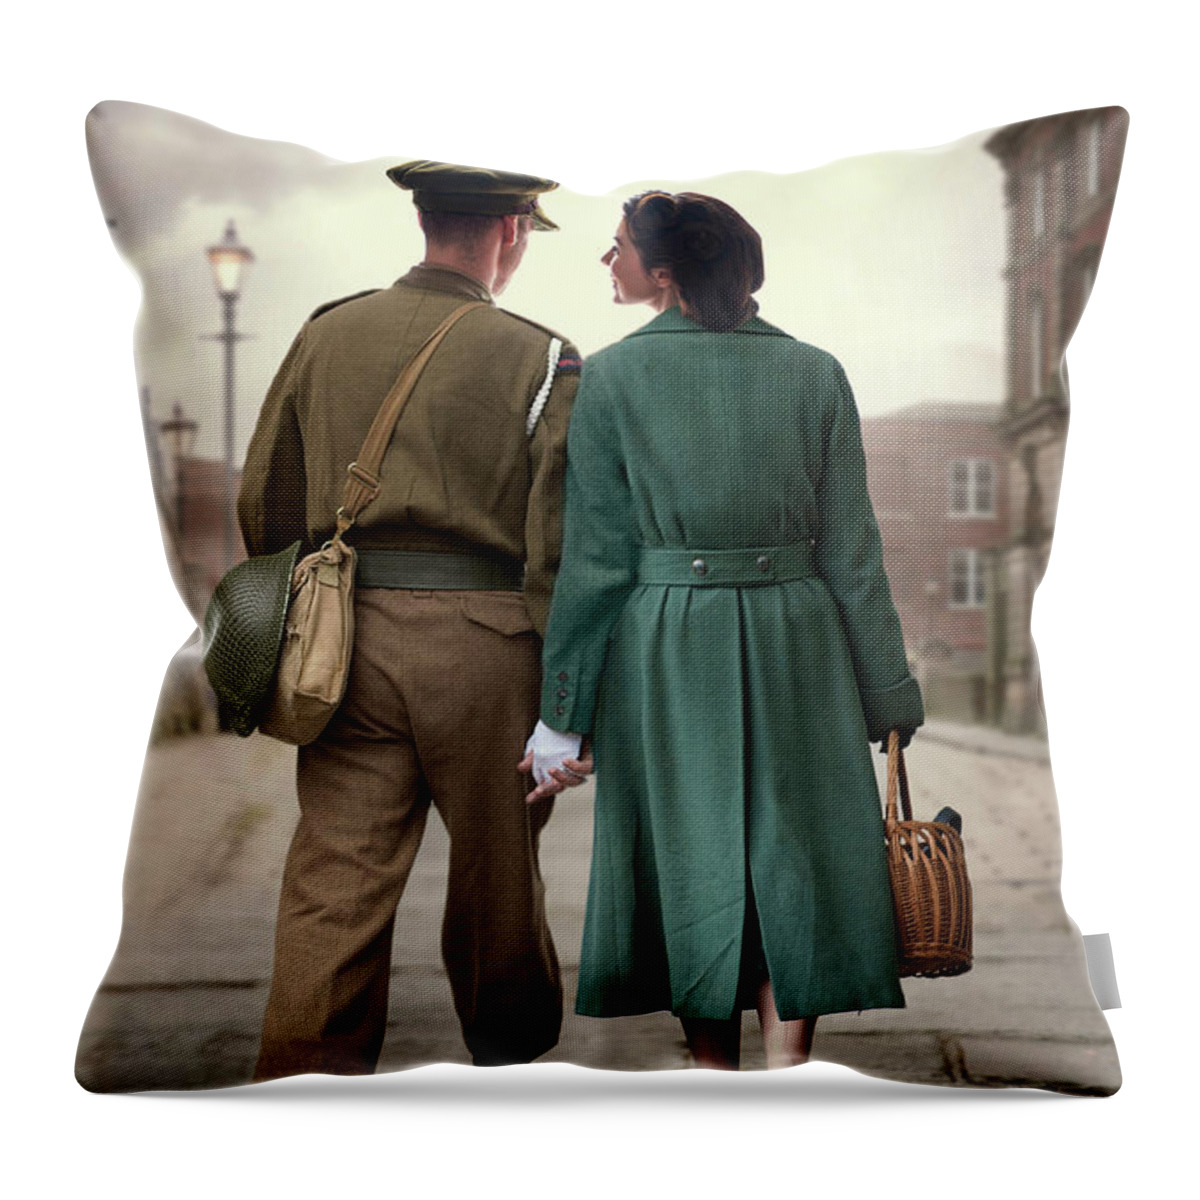 Woman Throw Pillow featuring the photograph 1940s Couple #11 by Lee Avison